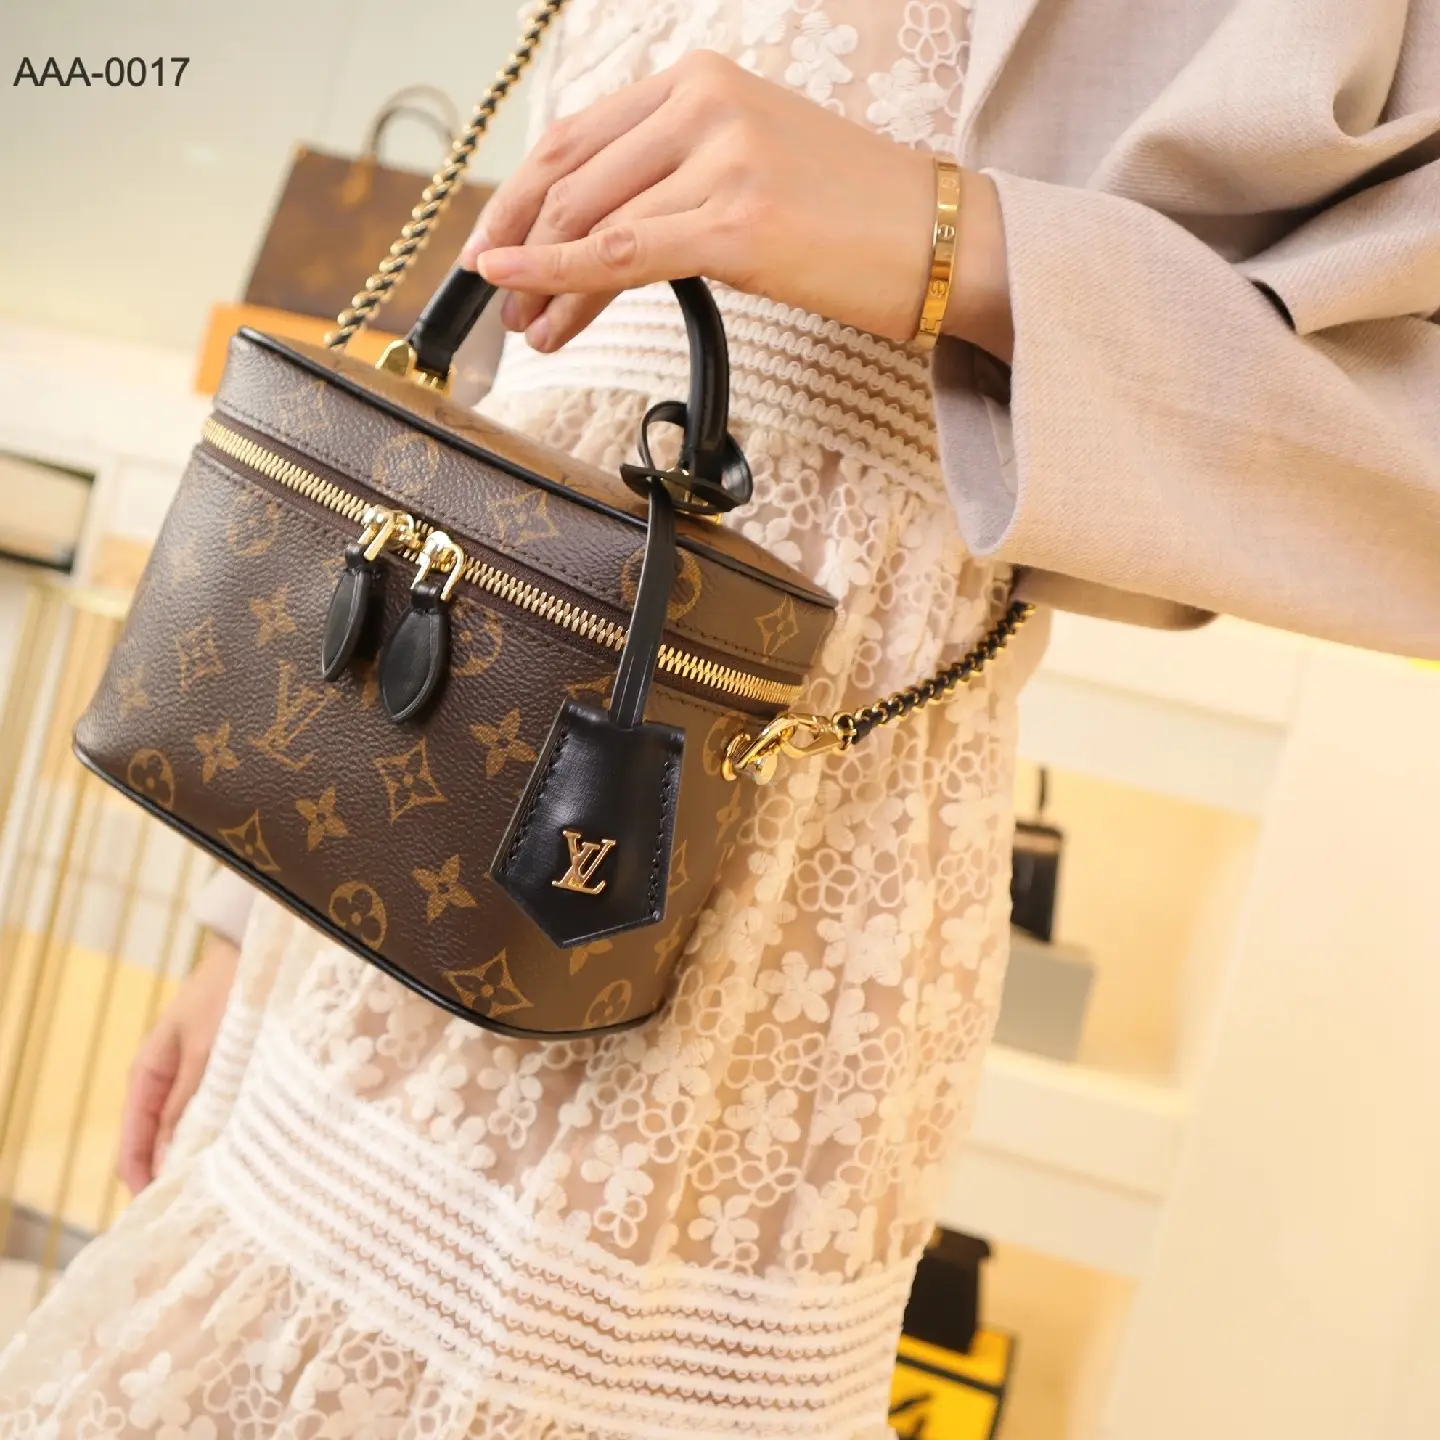 HighendSociety My Top 9: Louis Vuitton Bags, Gallery posted by Calista  Cherrie